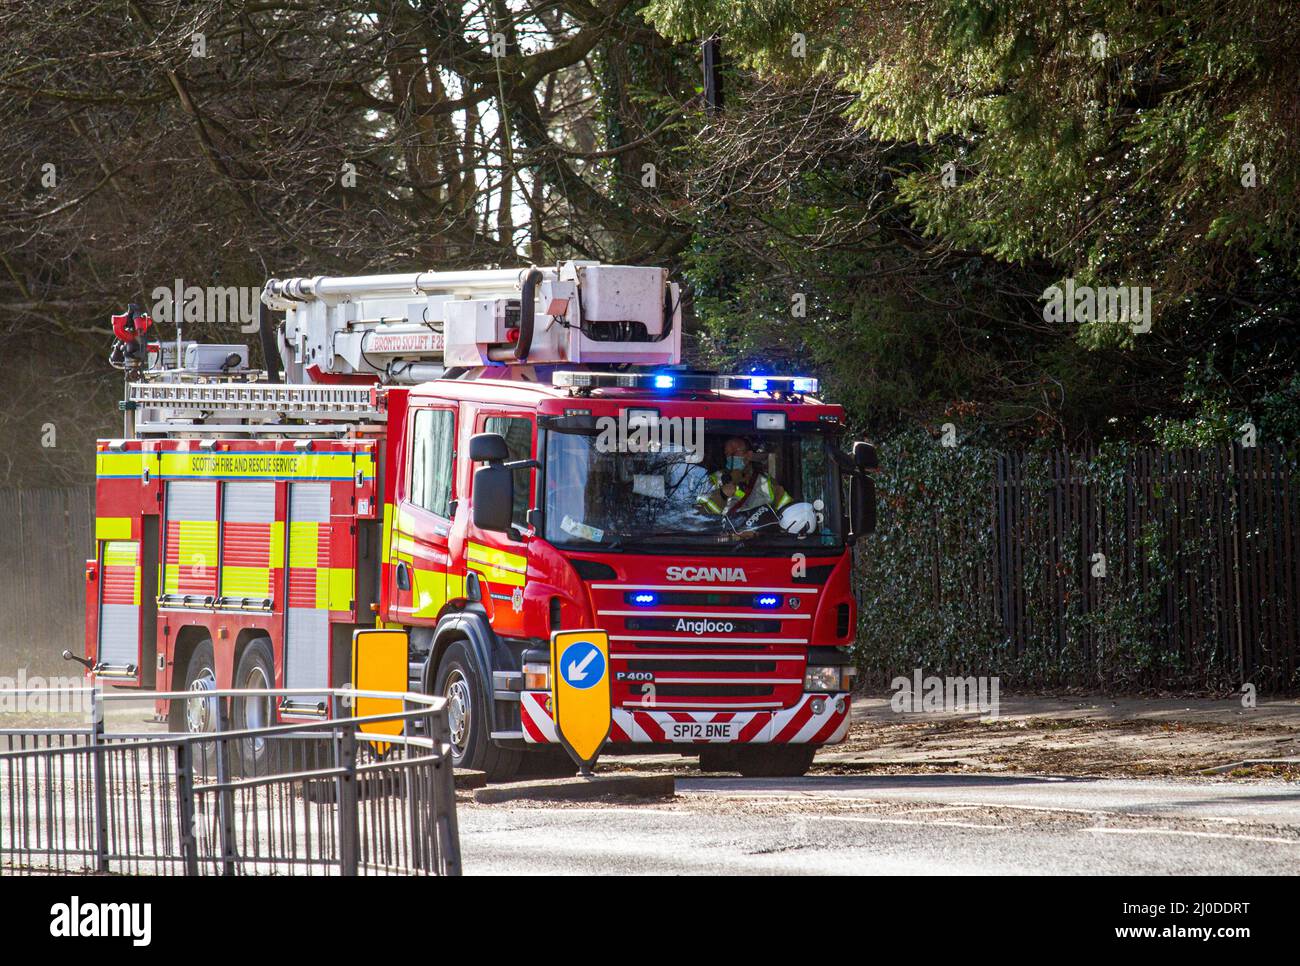 A Scottish Fire and Rescue Service fire engine responds at high speed to an emergency 999 call along MacAlpine Road in Ardler, Dundee, Scotland Stock Photo